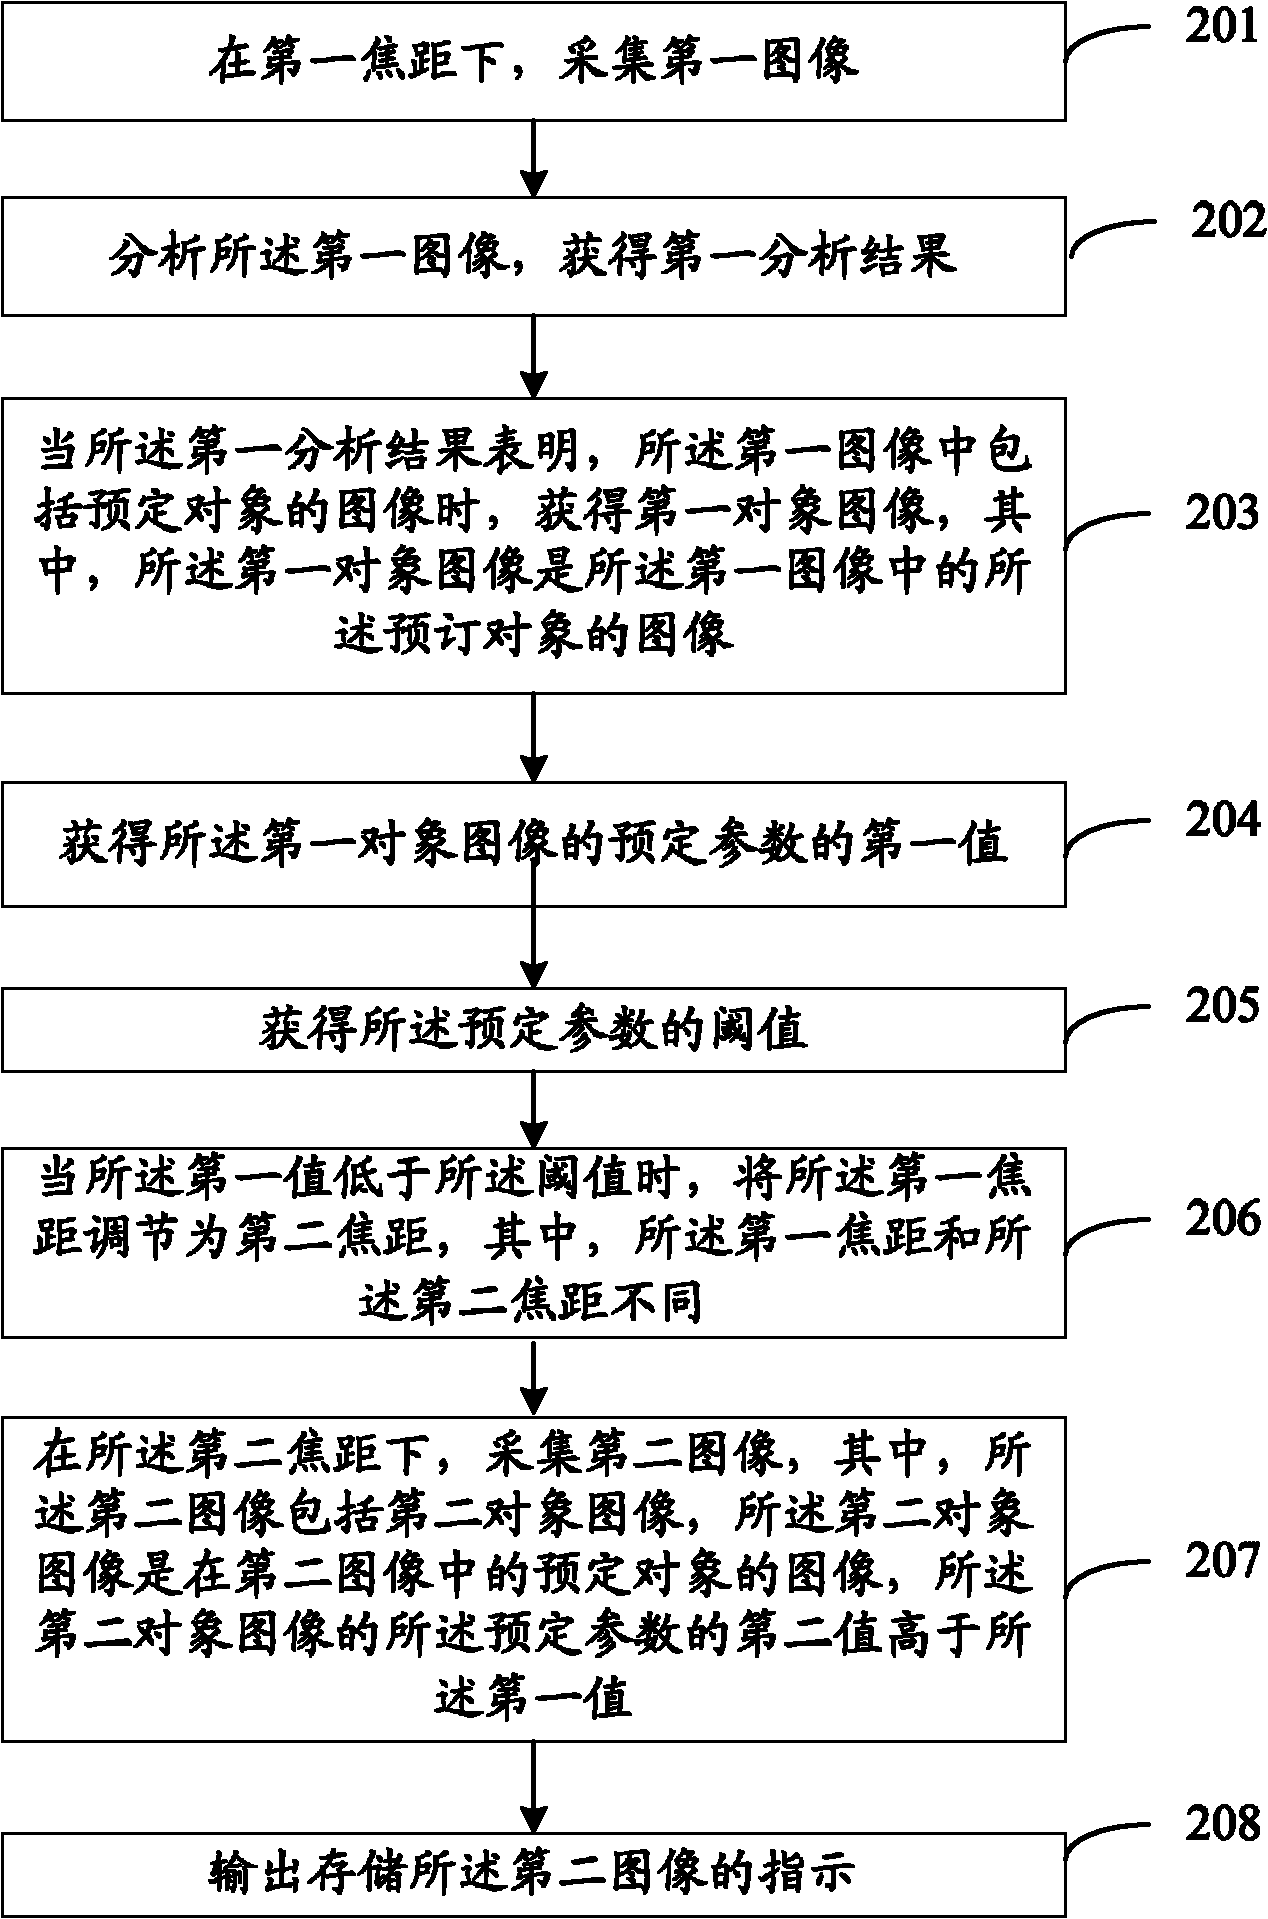 Method and apparatus for image collection